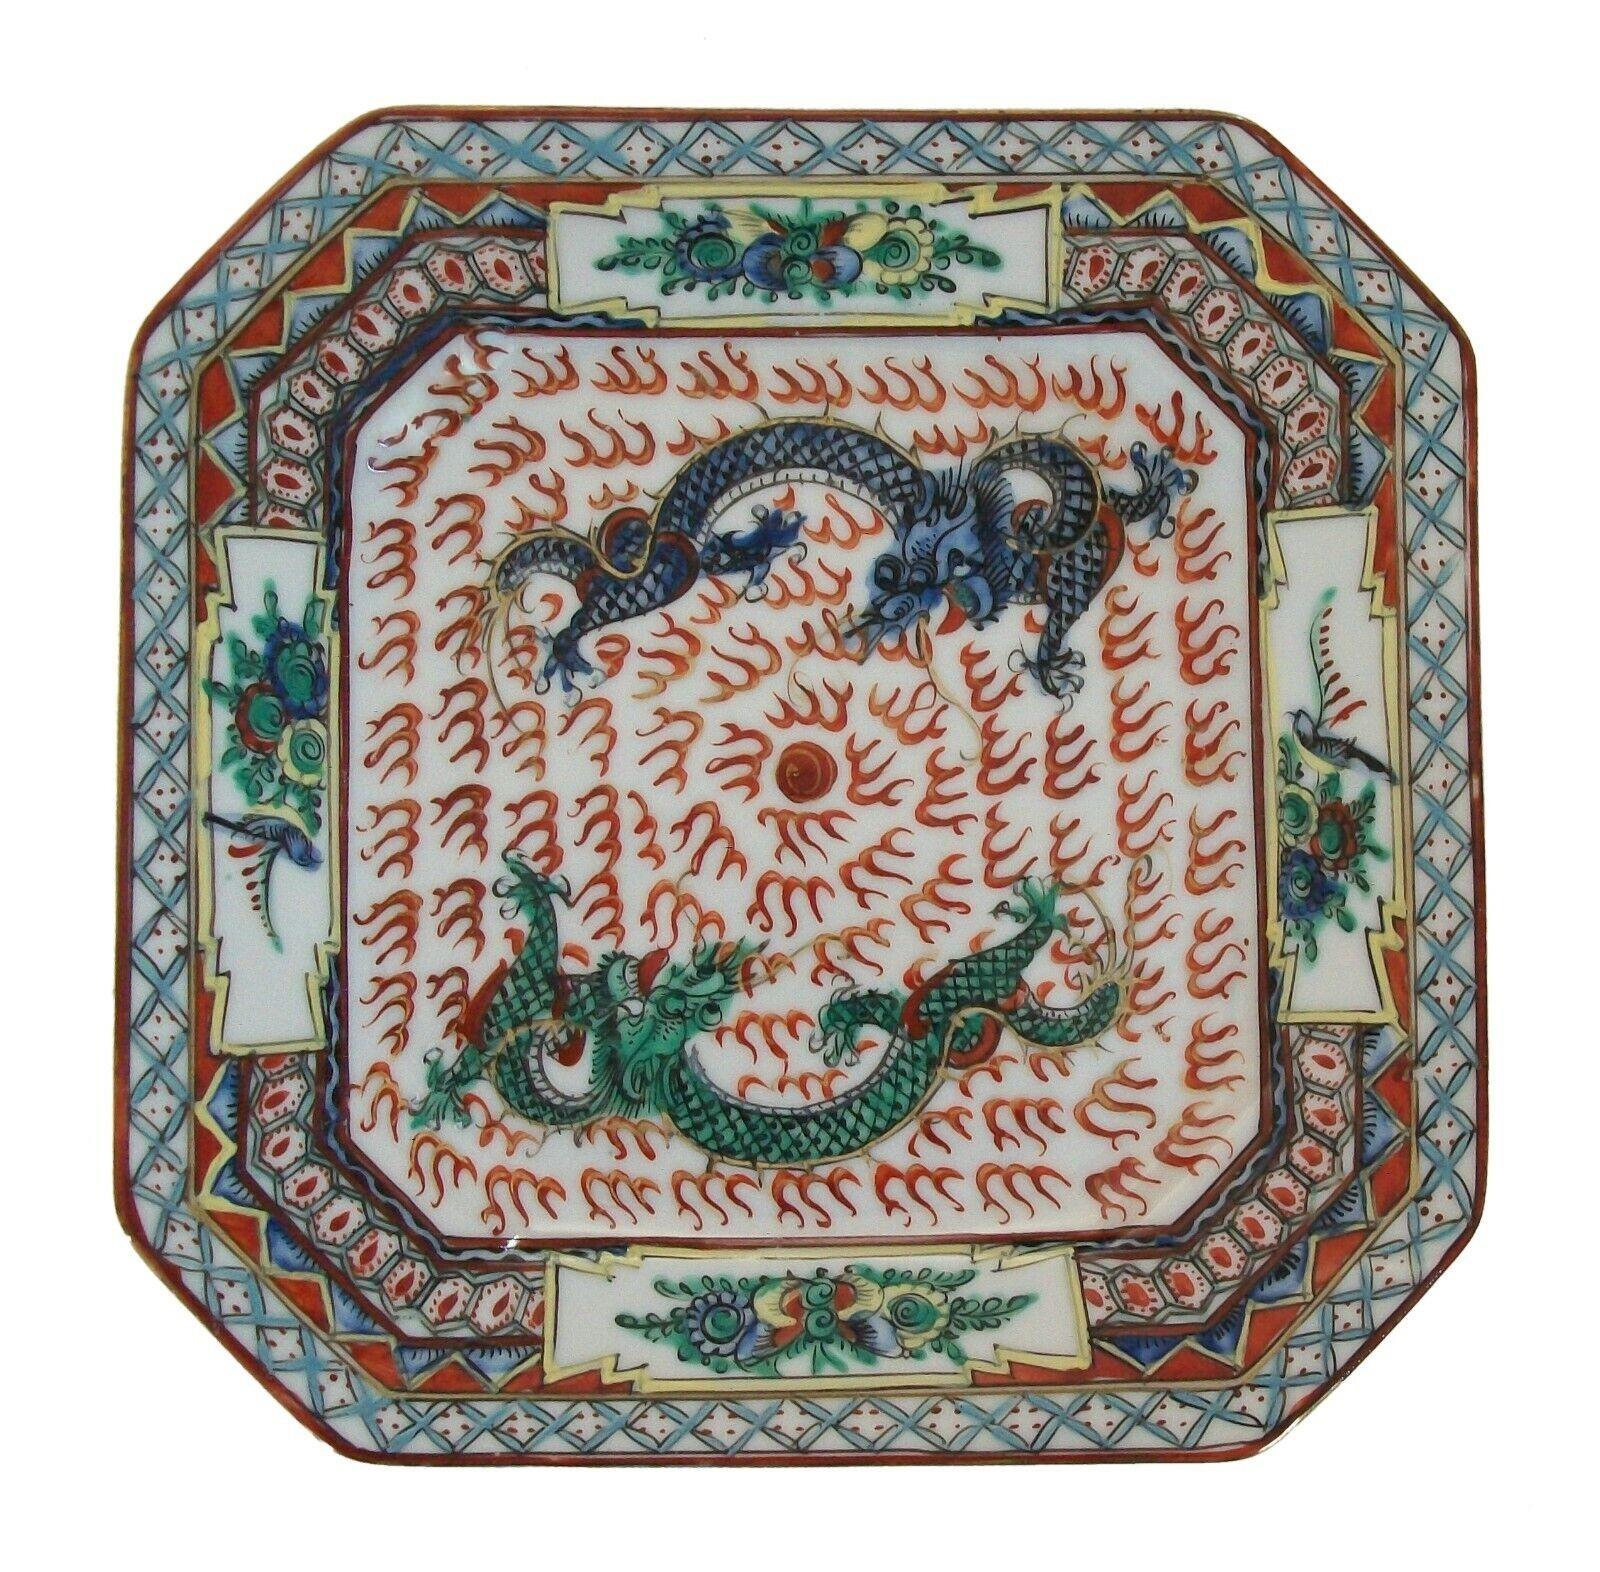 Antique porcelain plate - hand painted with two dragons chasing a flaming pearl - floral and geometric border - canted corners - traces of original gilding - signed with a red four character Qianlong mark to the back - China - early 20th